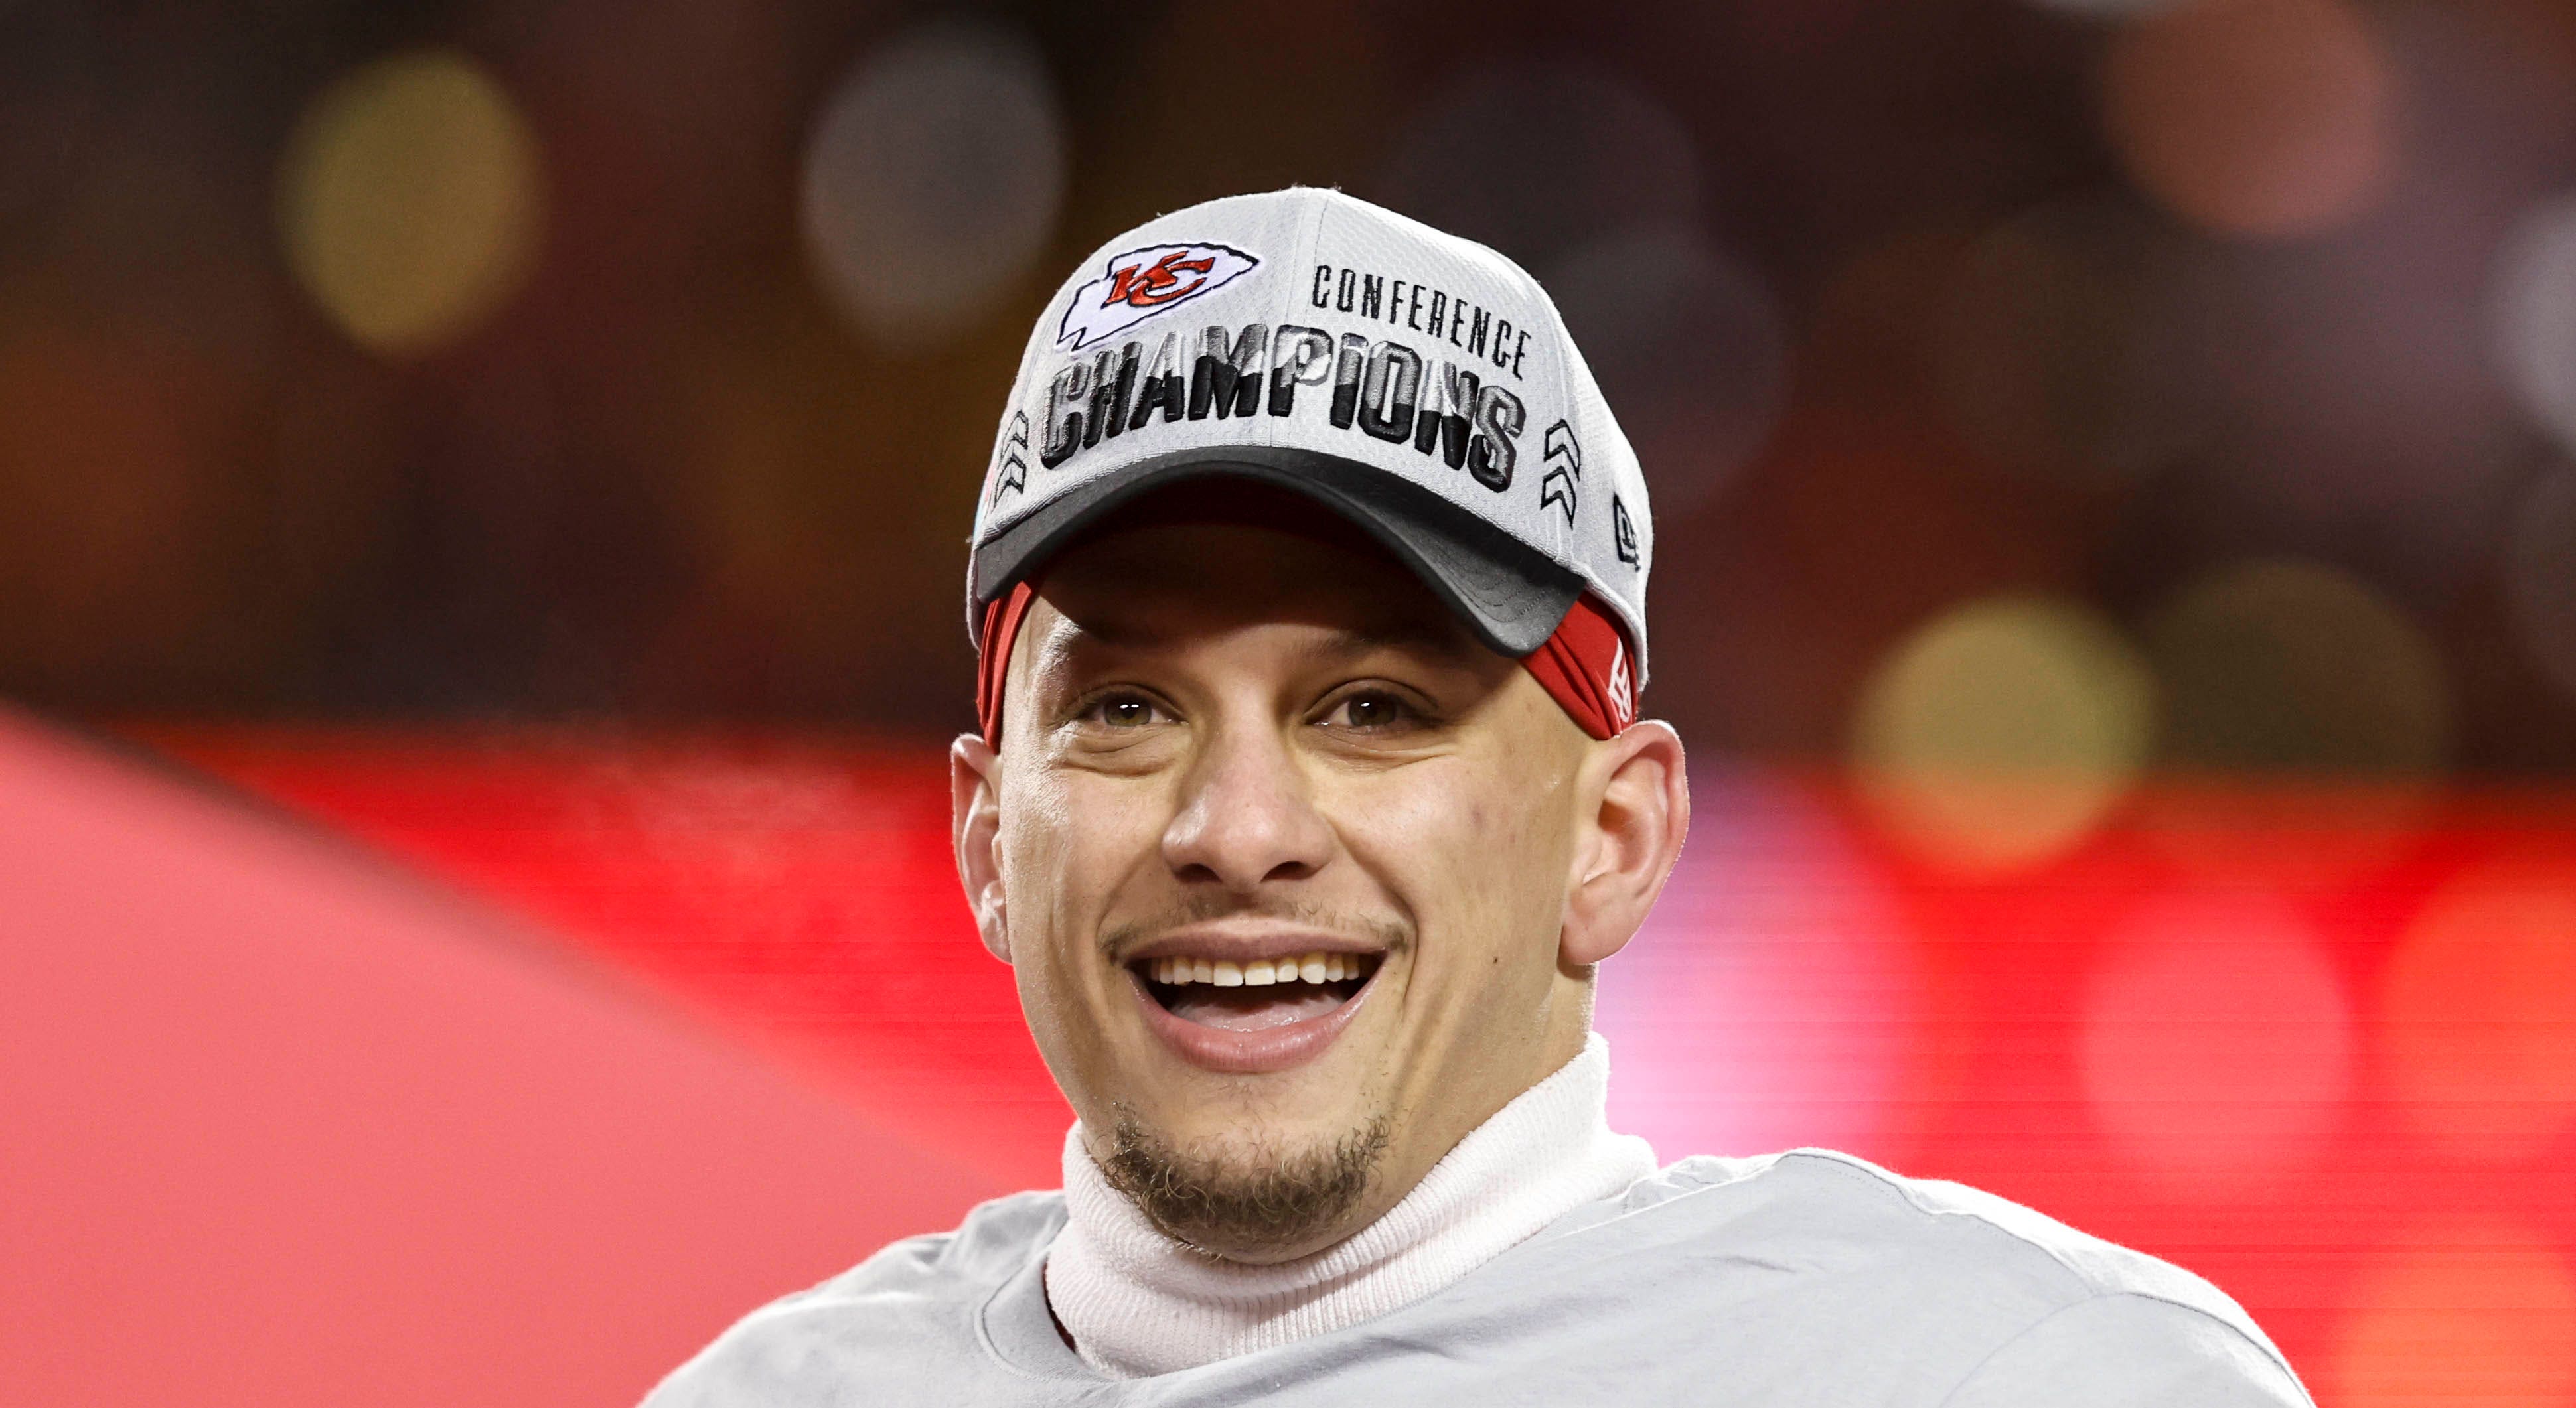 Patrick Mahomes promises wacky Super Bowl celebration with Cooper Manning if Chiefs win